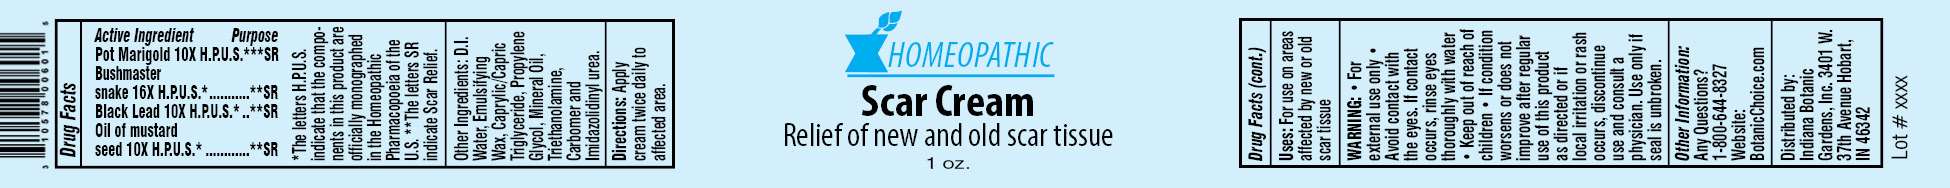 Homeopathic Scar